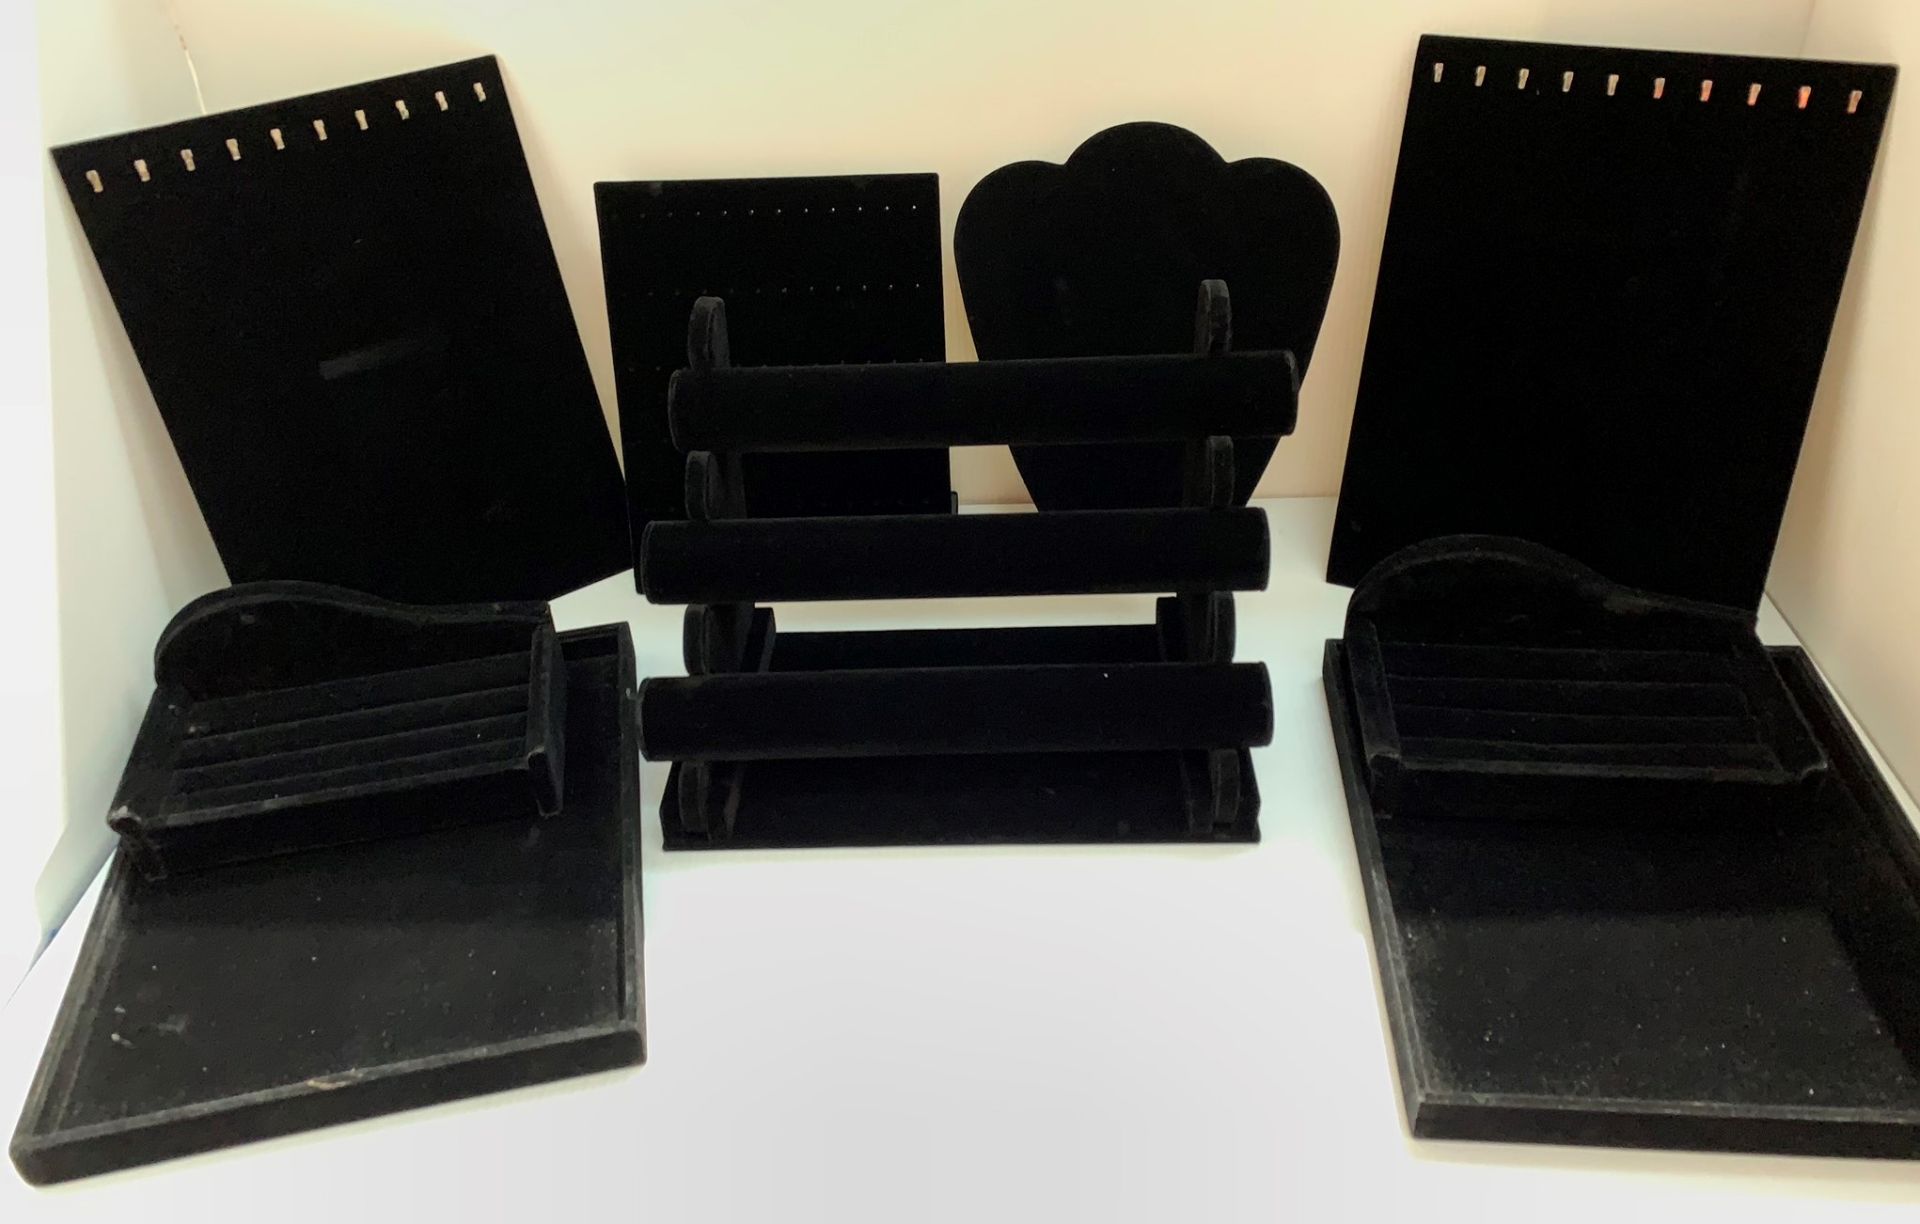 Assorted black jewellery display stands (in plastic lidded box)